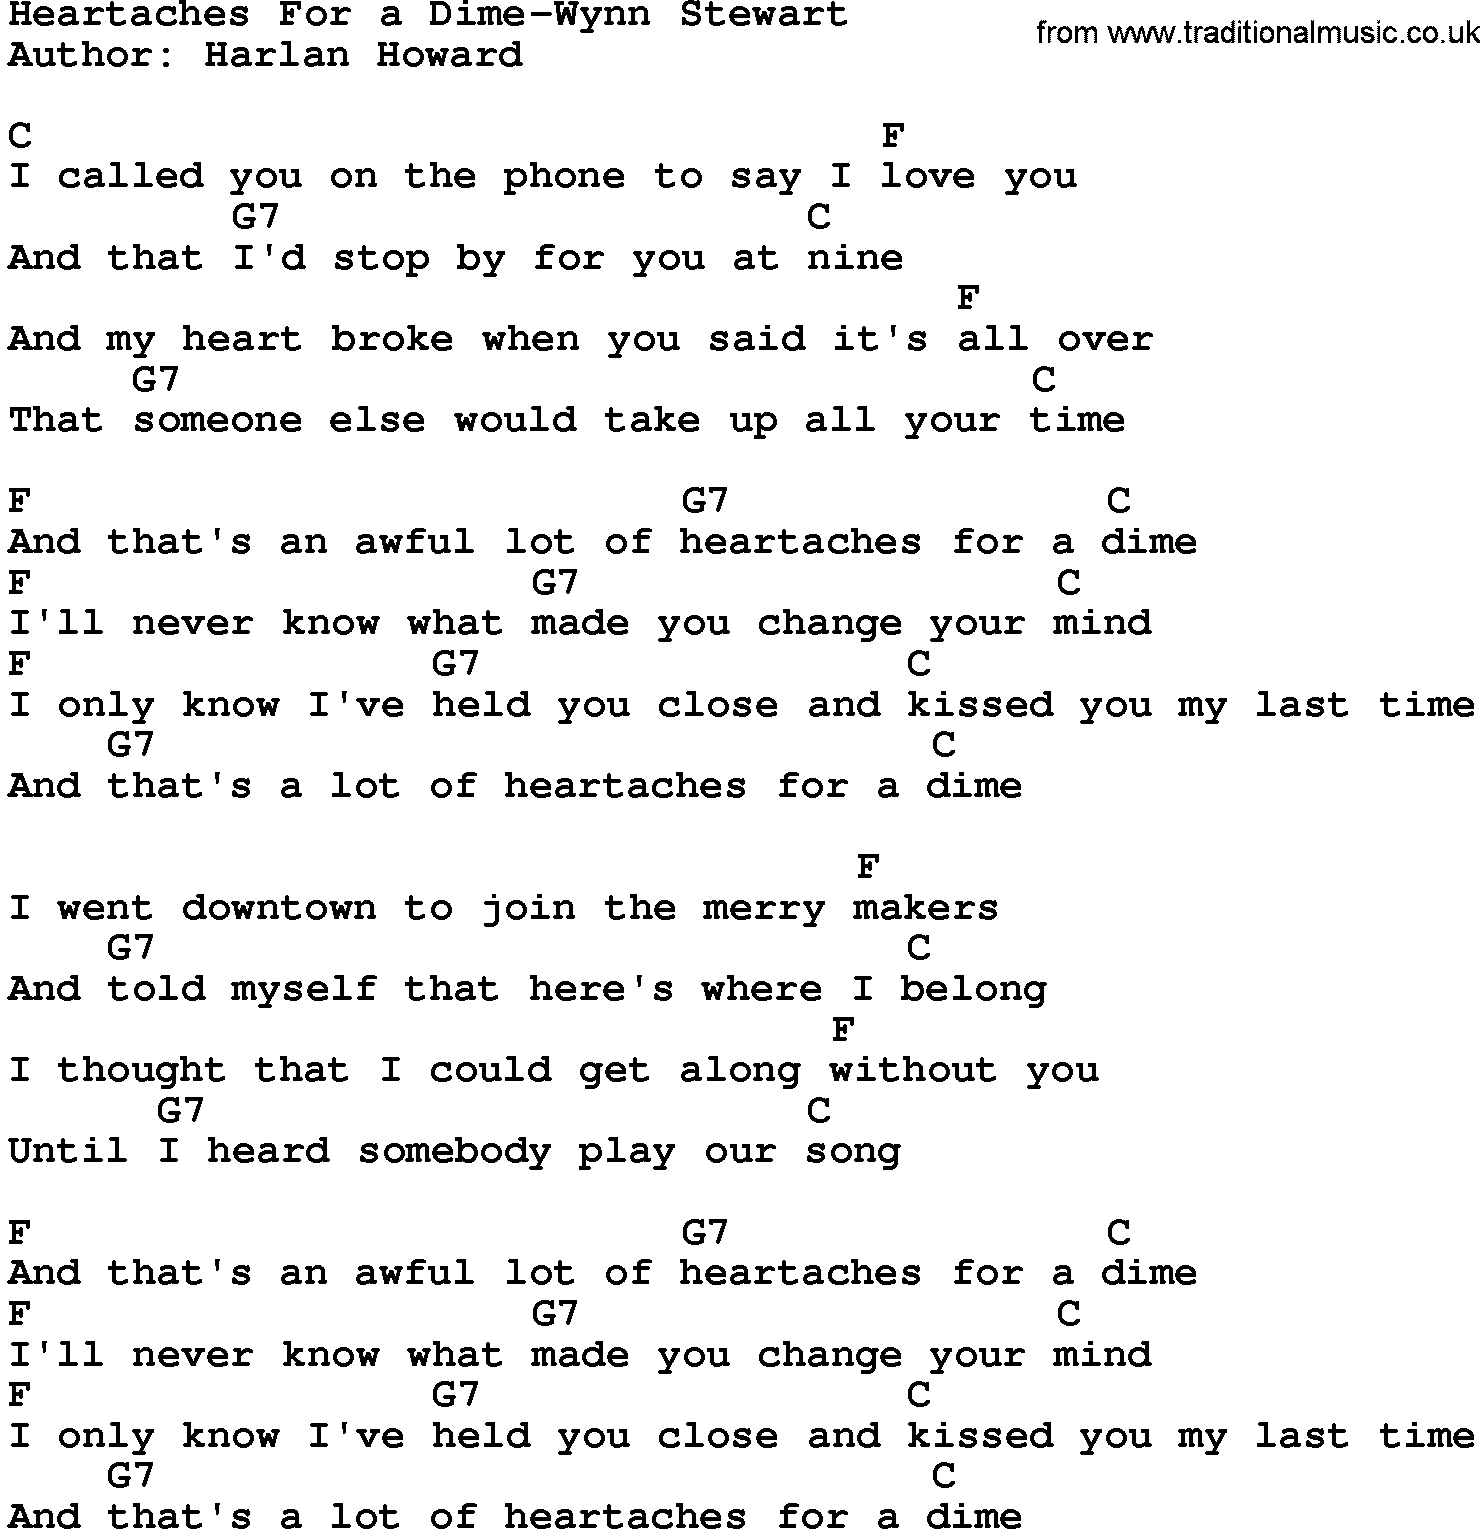 Country music song: Heartaches For A Dime-Wynn Stewart lyrics and chords